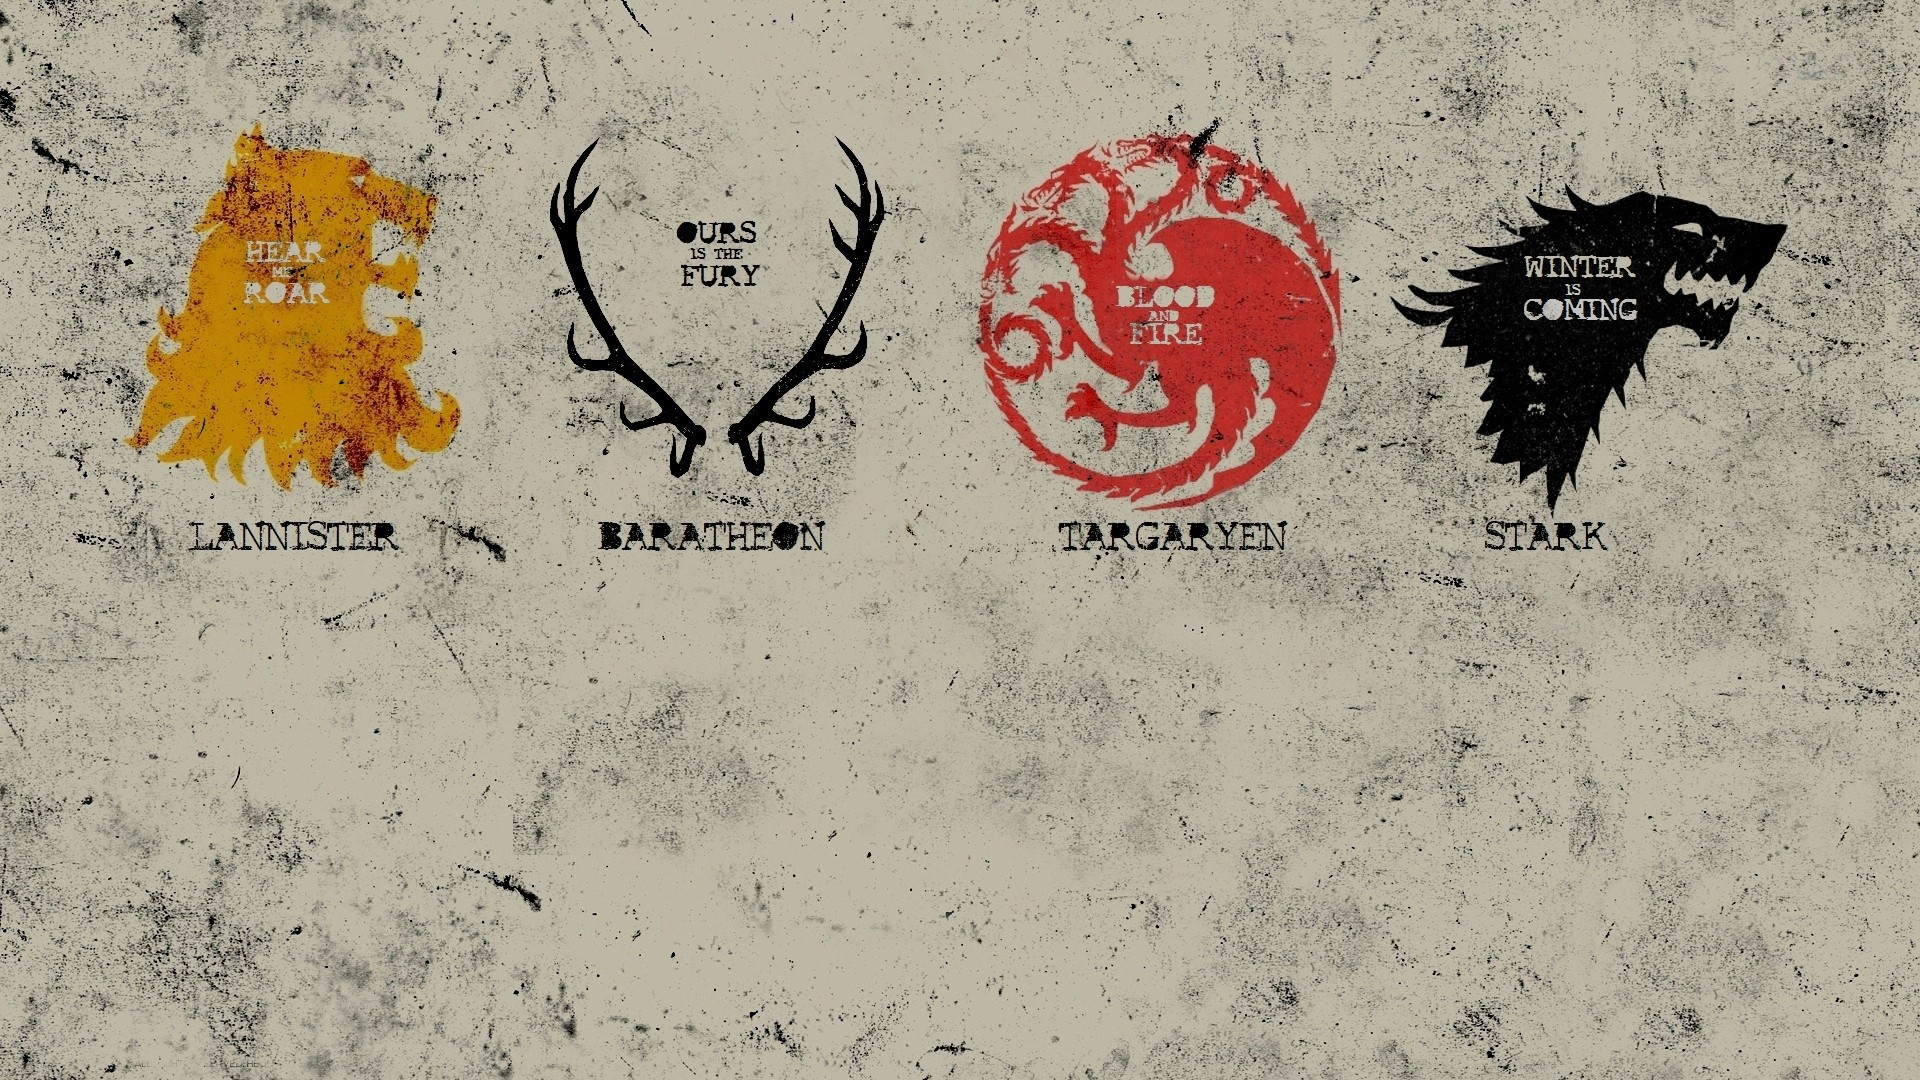 1920x1080 Wallpaper : illustration, wall, A Song of Ice and Fire, Game of Thrones, sigils, poster, ART, number, px, font wallup 563261 HD Wallpapers